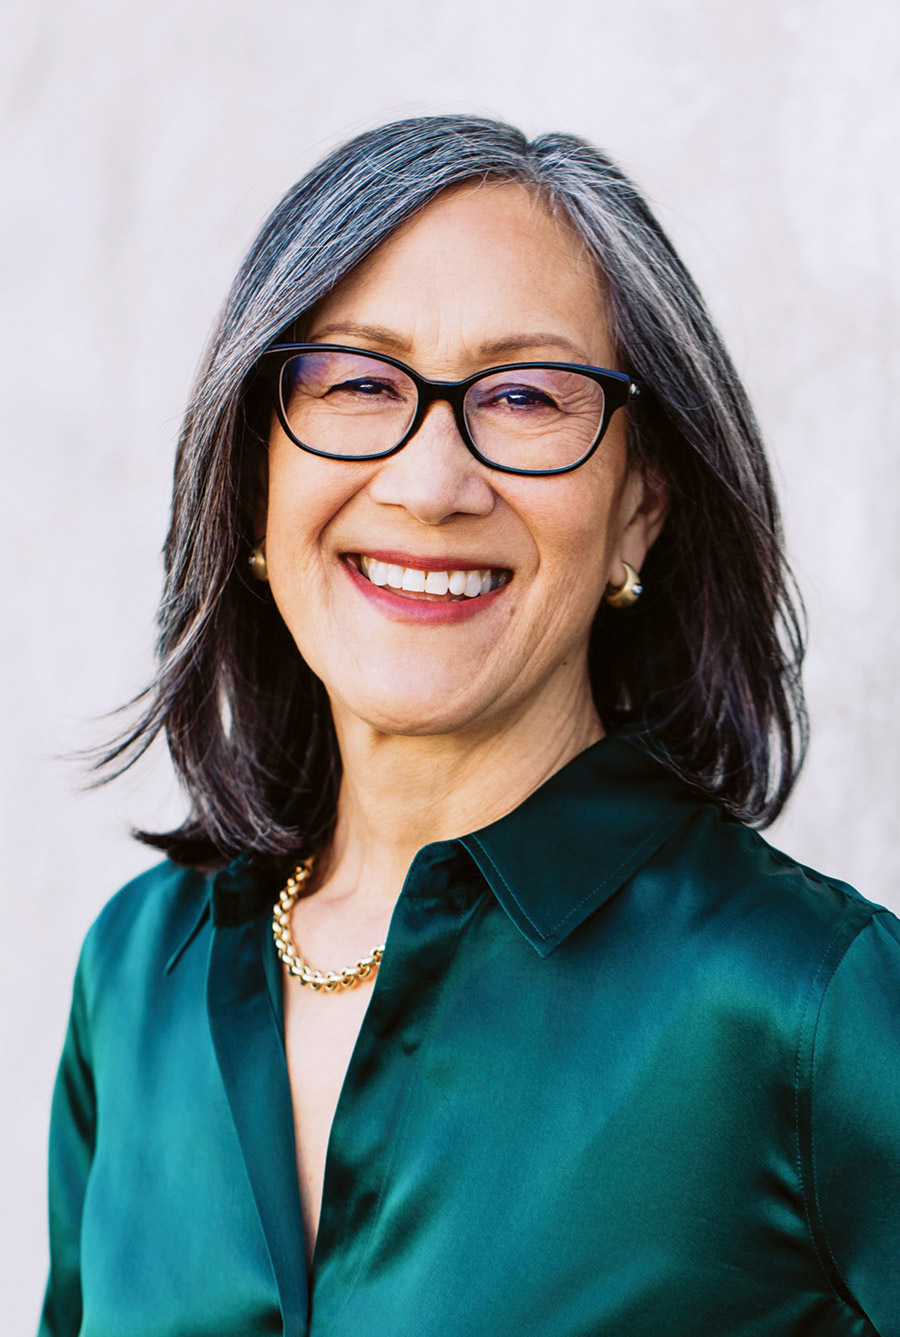 A portrait headshot photograph of Kathryn Ma smiling in an emerald green silk material button-up dress shirt with a golden necklace and see through black outer frame color glasses plus two golden earrings